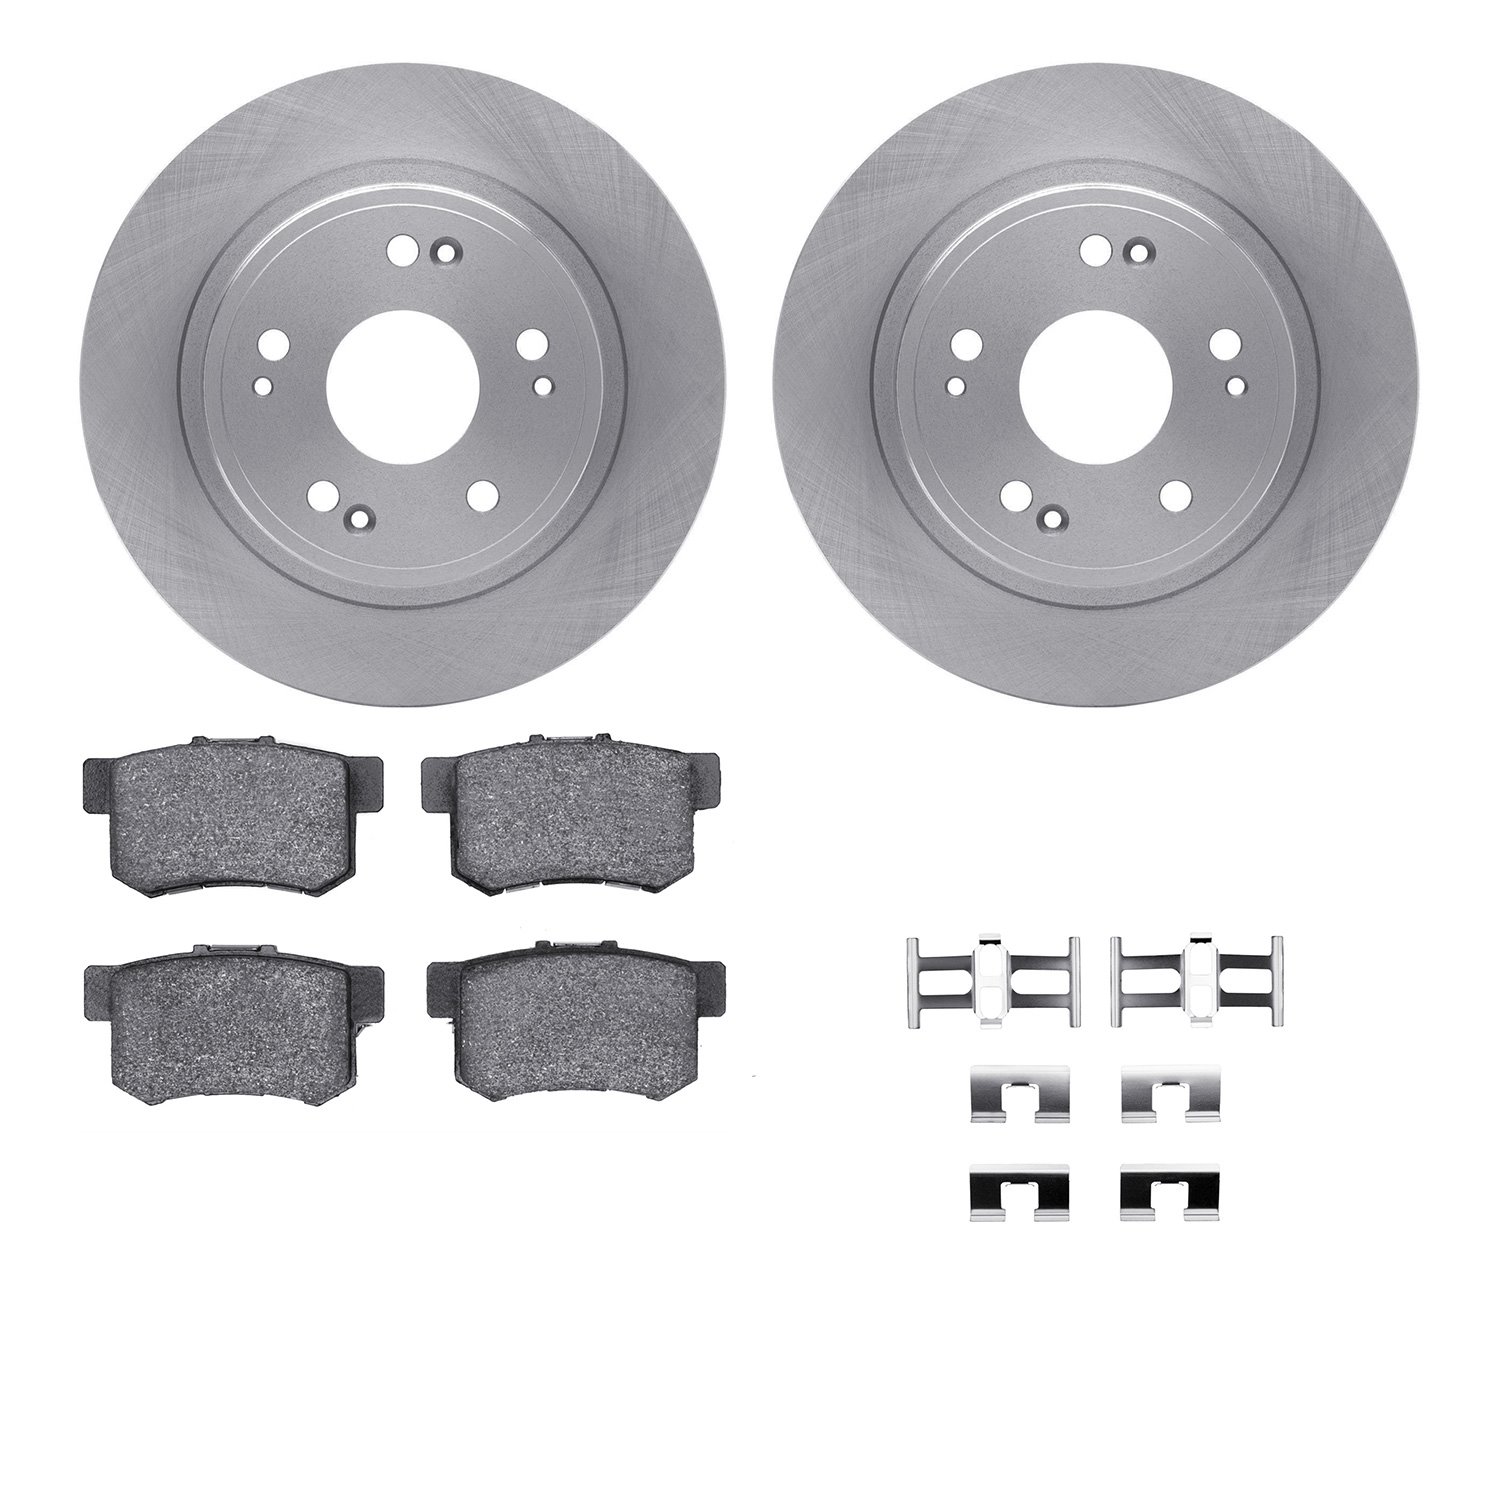 6312-59049 Brake Rotors with 3000-Series Ceramic Brake Pads Kit with Hardware, Fits Select Acura/Honda, Position: Rear